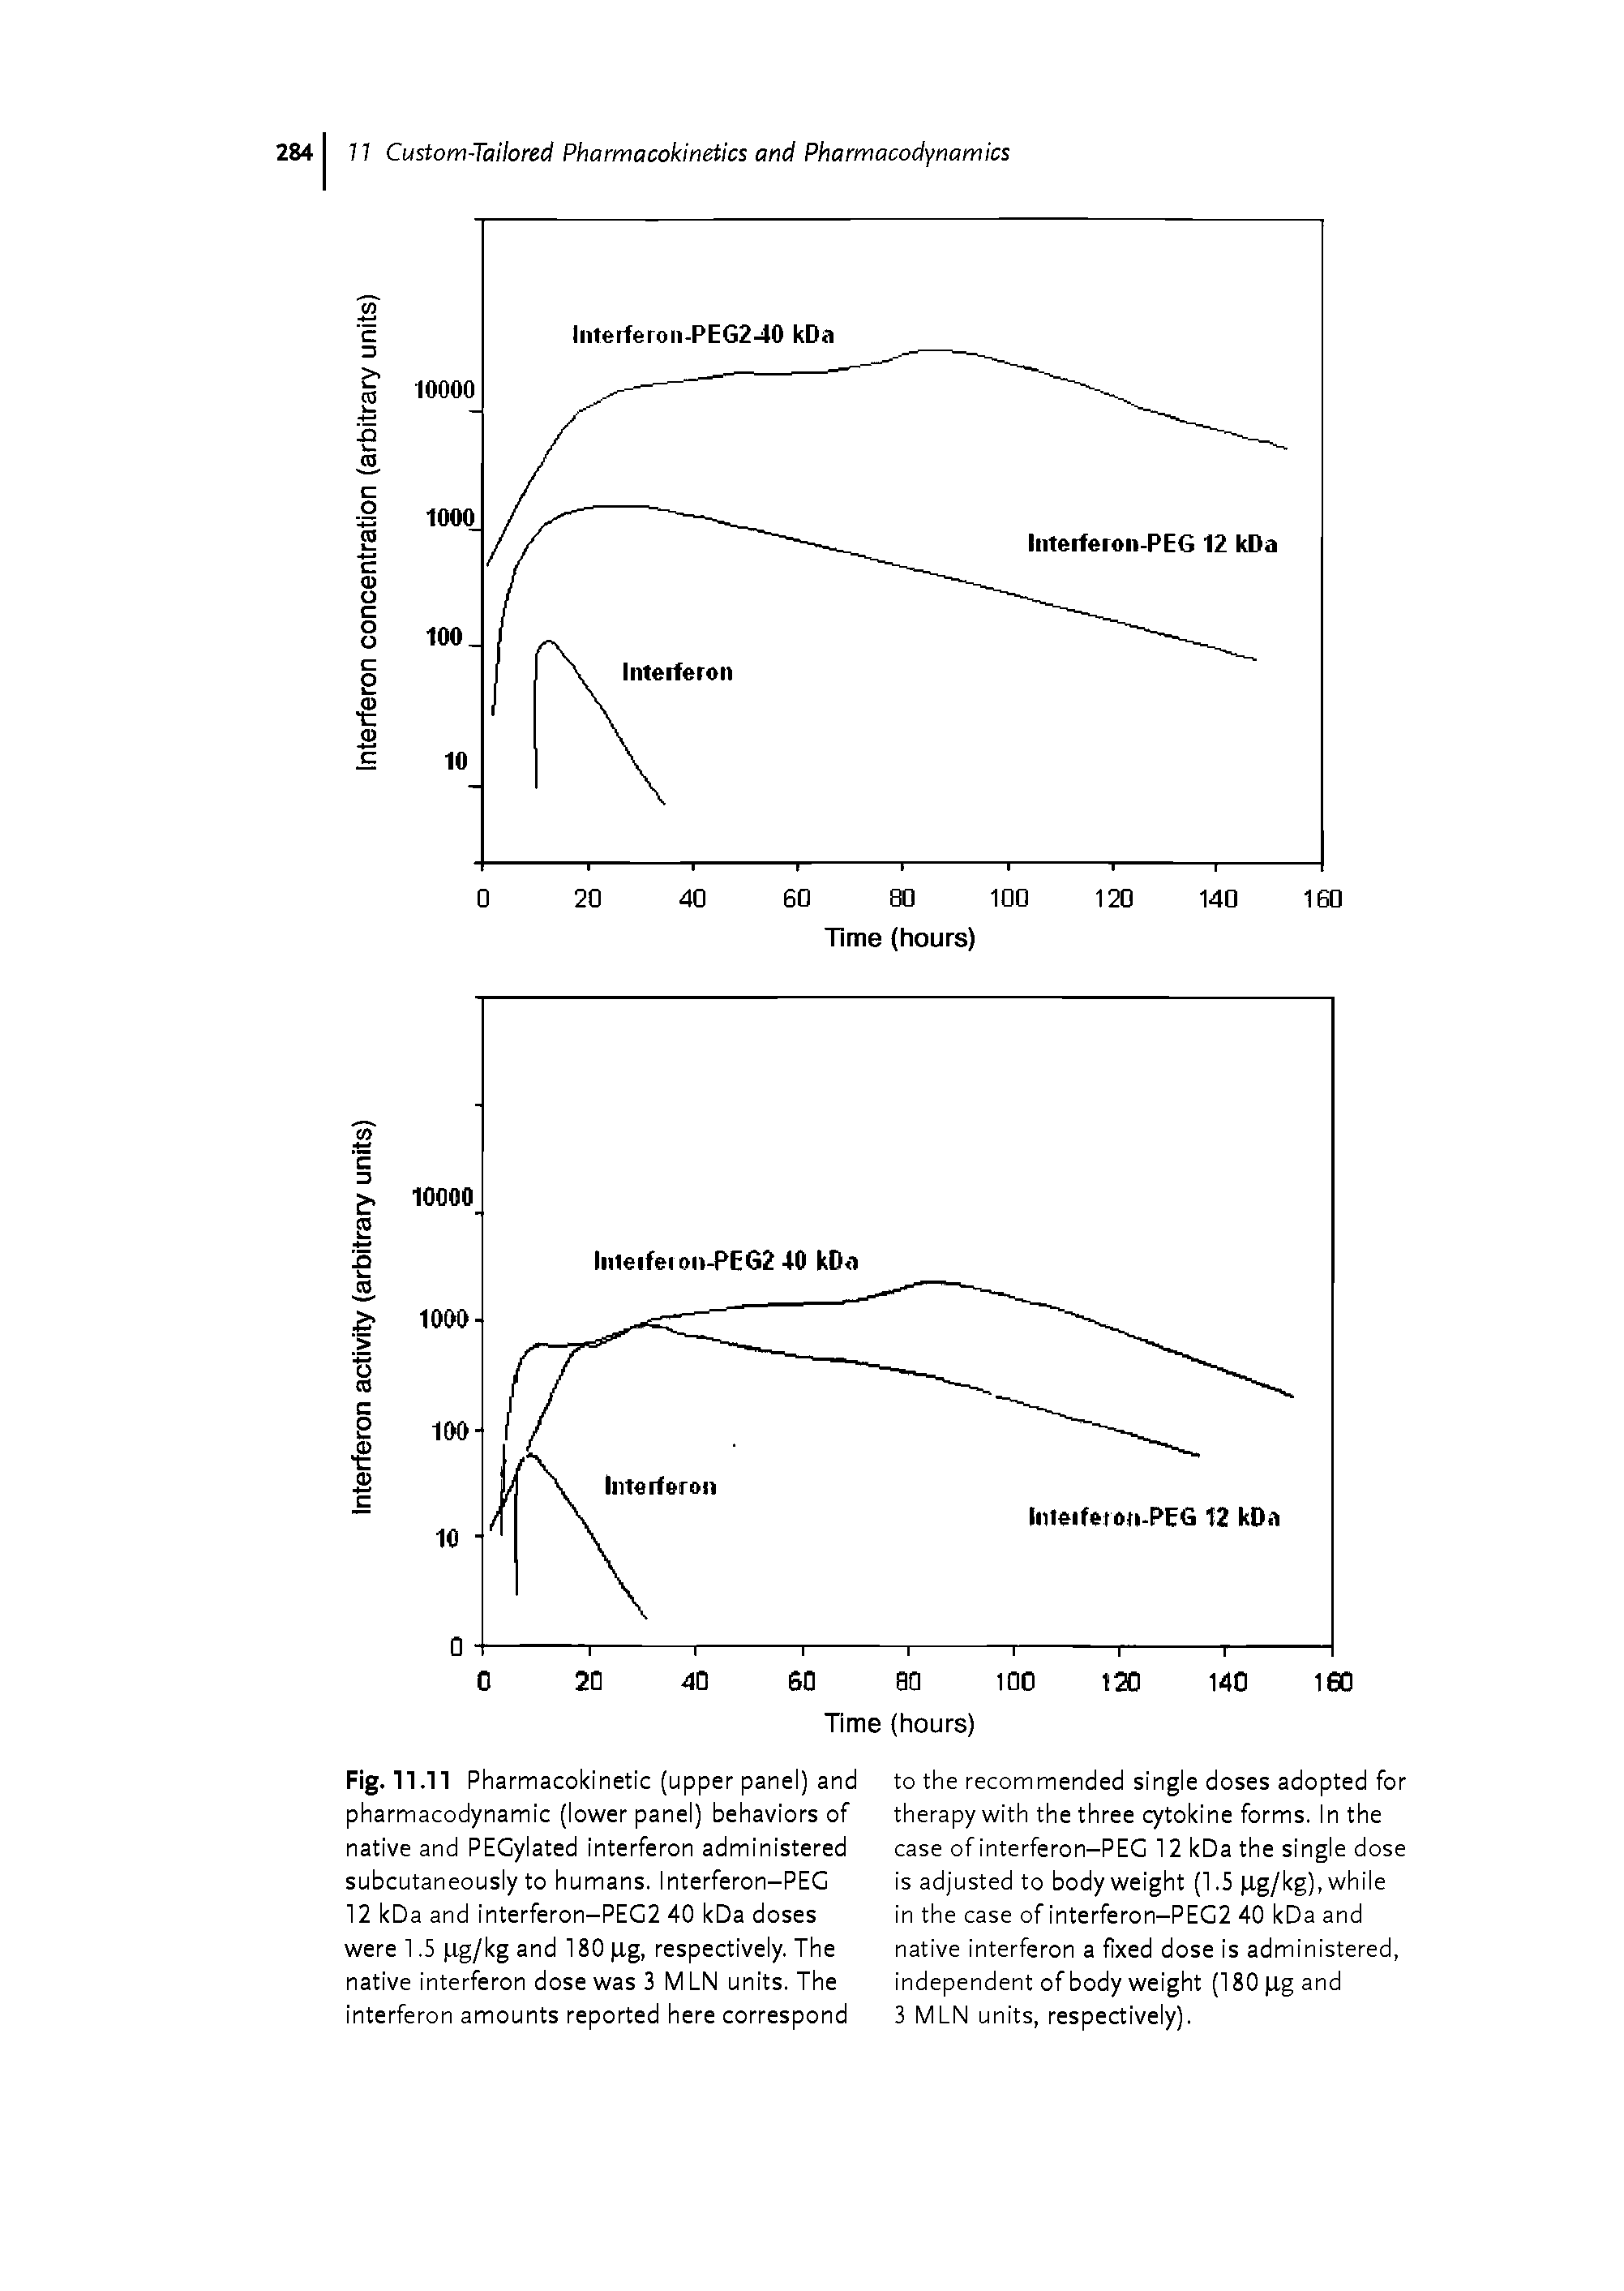 Fig. 11.11 Pharmacokinetic (upper panel) and pharmacodynamic (lower panel) behaviors of native and PEGylated interferon administered subcutaneously to humans. Interferon-PEG 12 kDa and interferon-PEG2 40 kDa doses were 1.5 ig/kg and 180 4g, respectively. The native interferon dose was 3 M LN units. The interferon amounts reported here correspond...